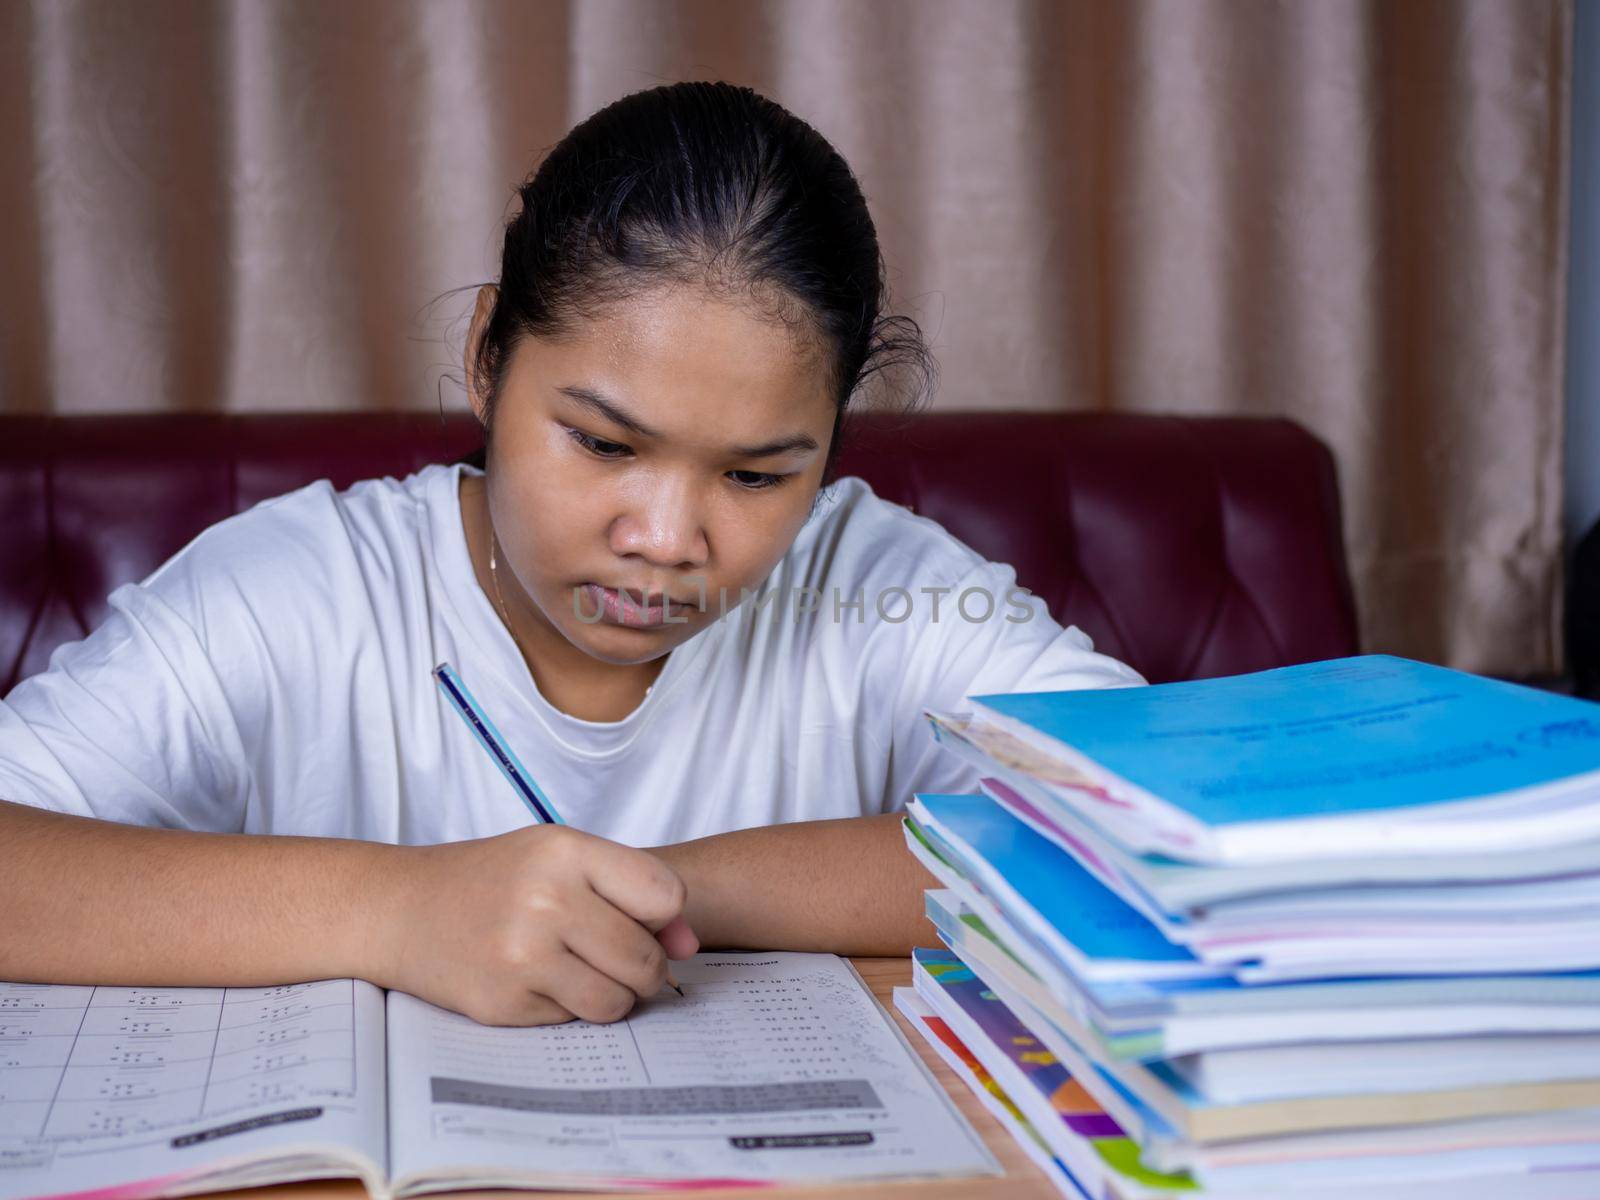 girl doing homework on a wooden table and there was a pile of books next to it The background is a red sofa and cream curtains.